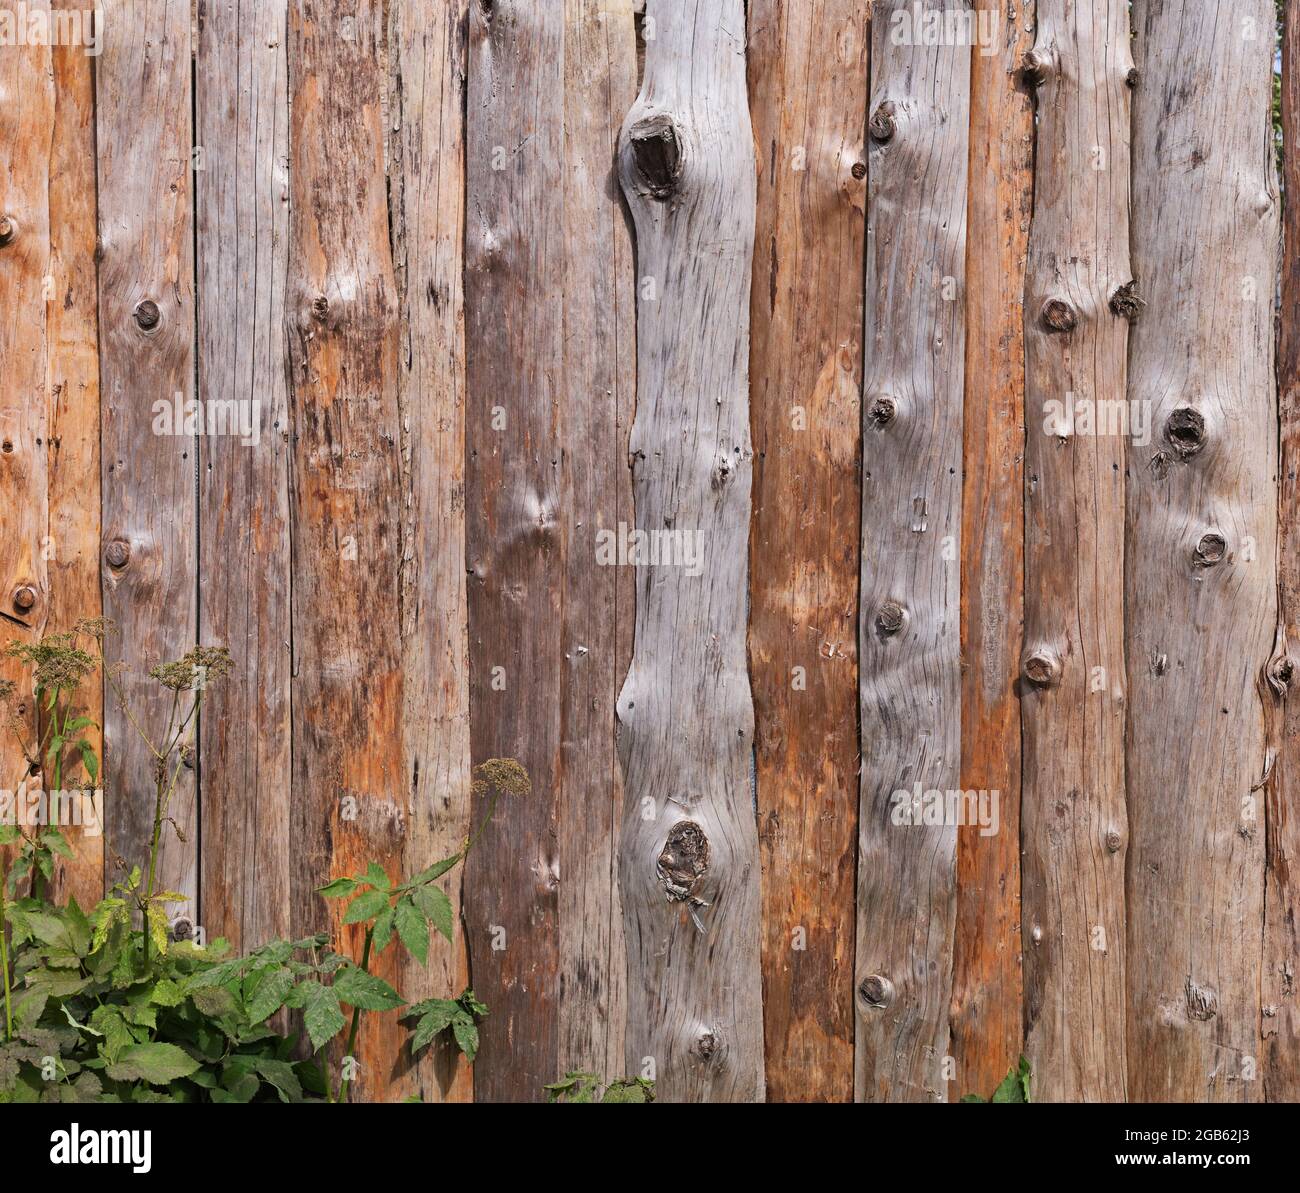 Fence from outer part of trees with smooth surface and knots Stock Photo